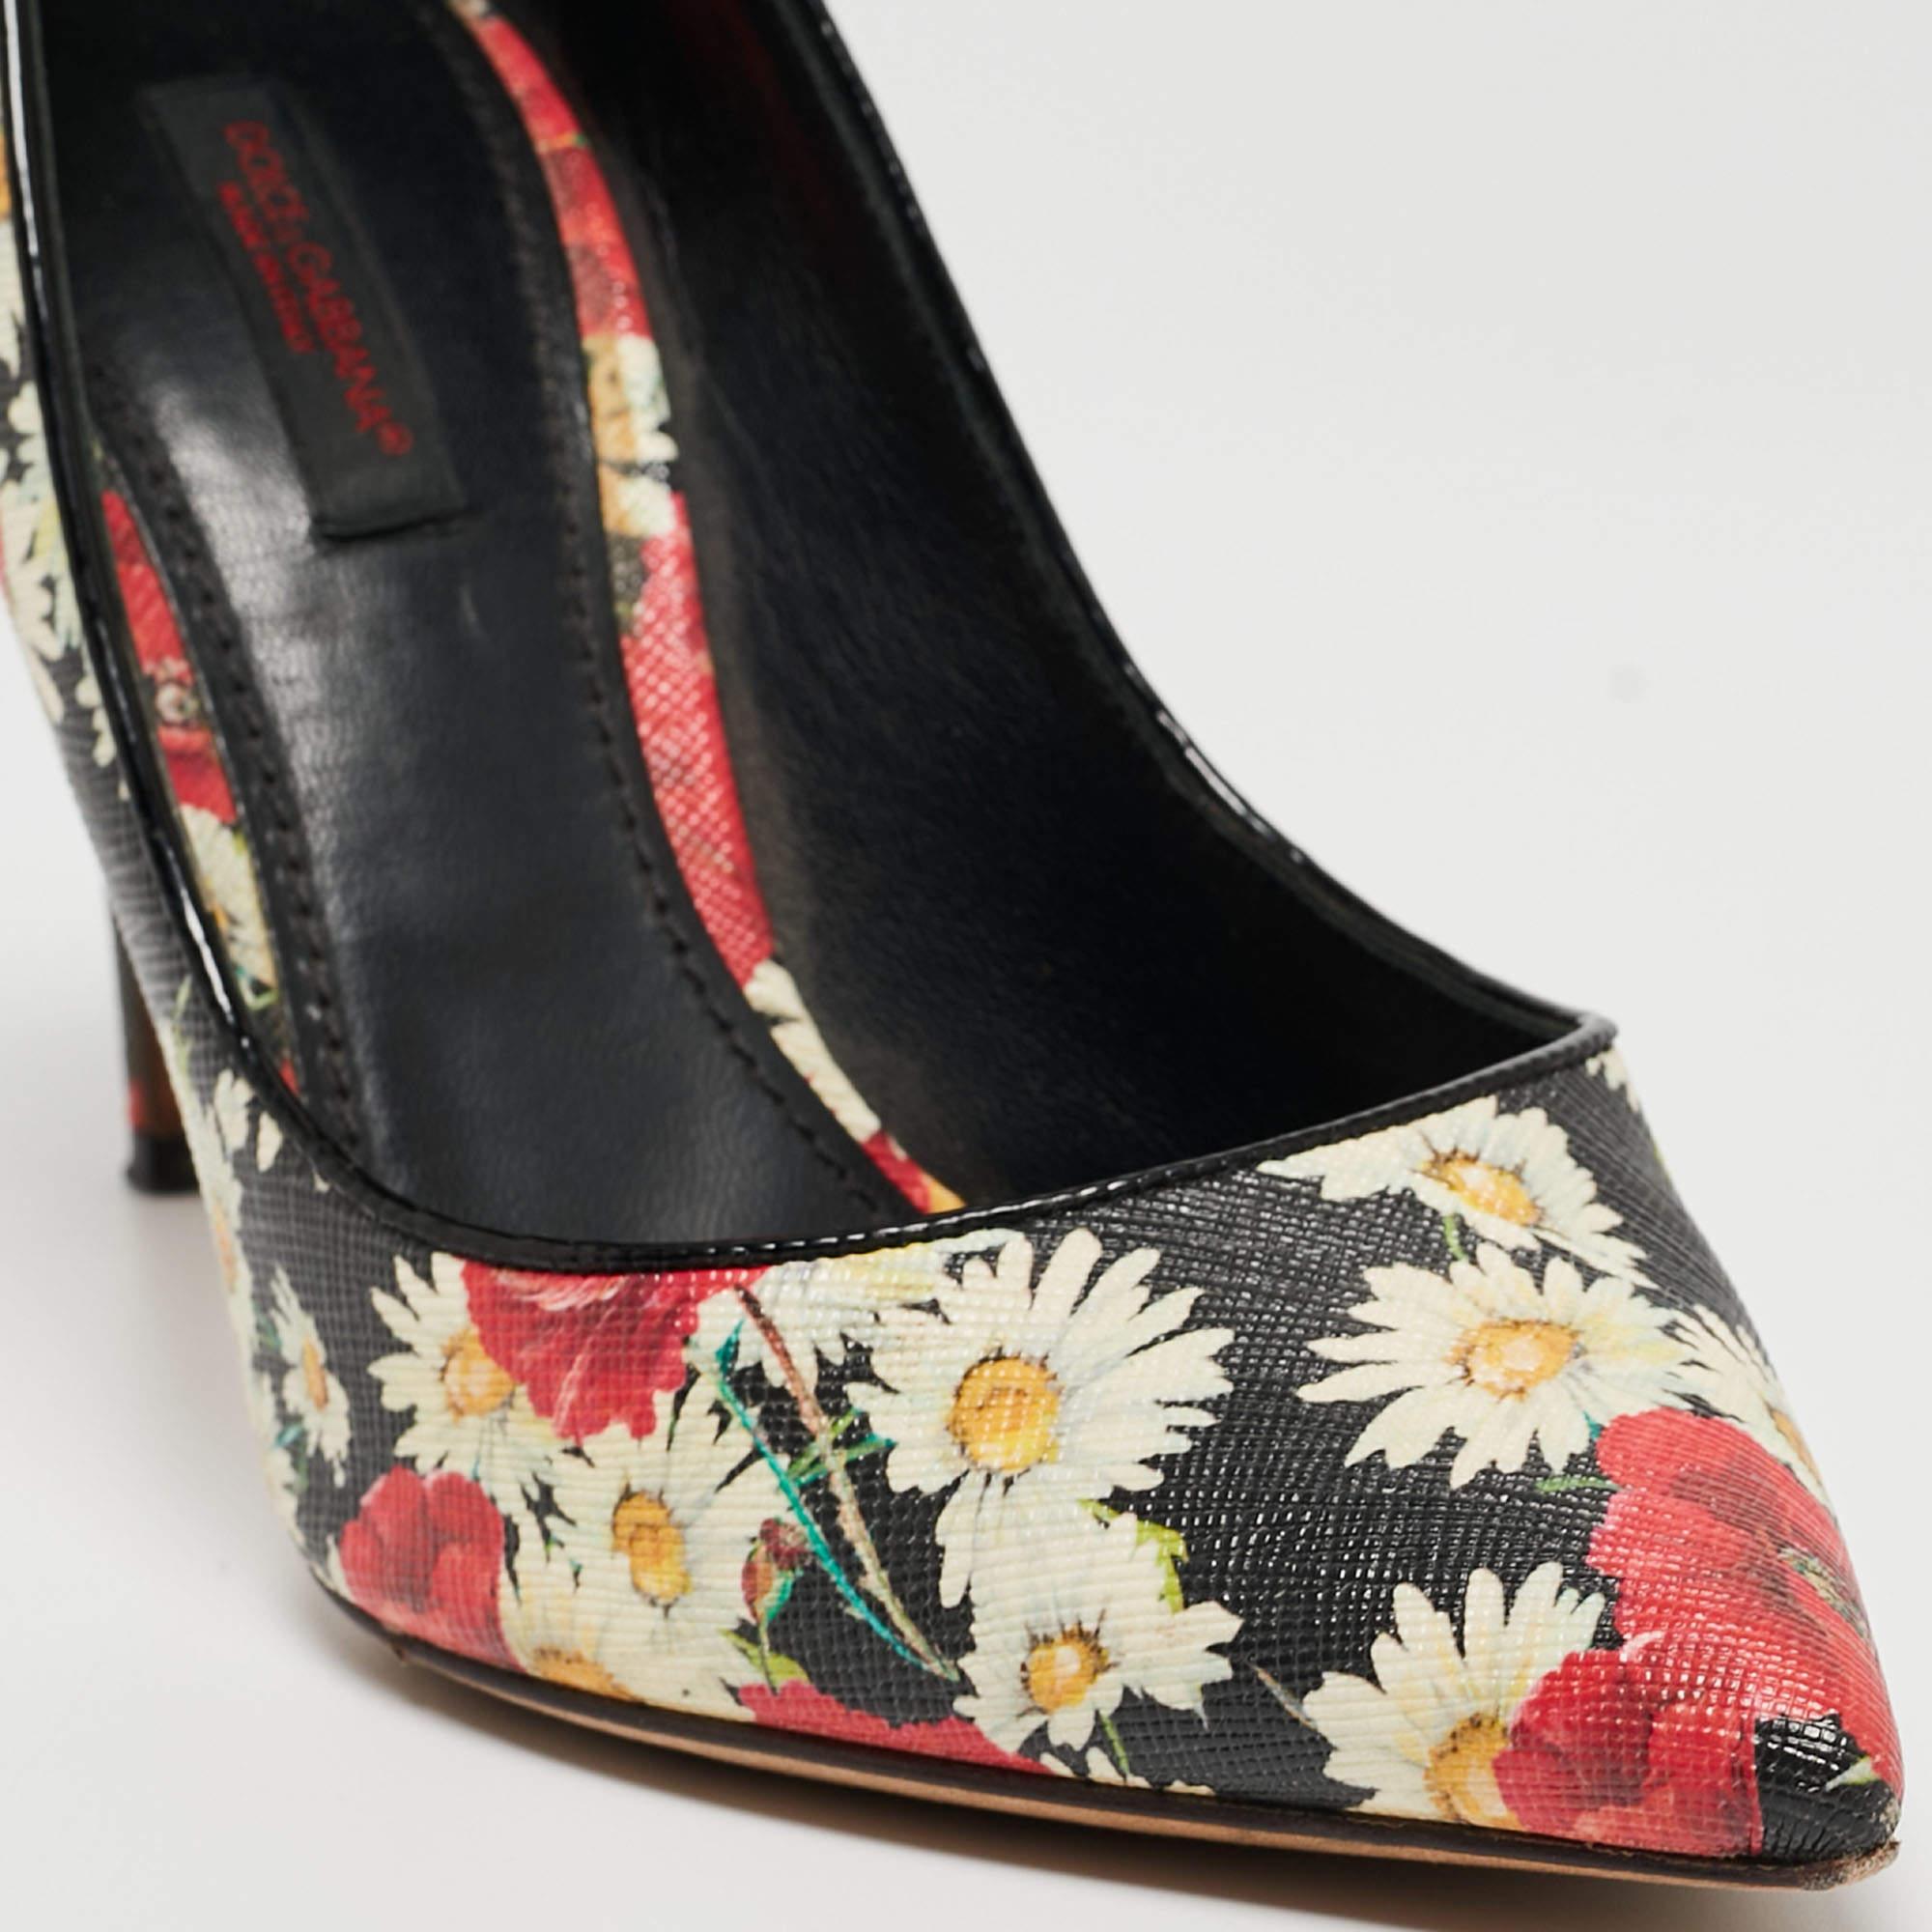 Dolce & Gabbana Tricolor Floral Print Textured Leather Pointed Toe Pumps Size 37 4